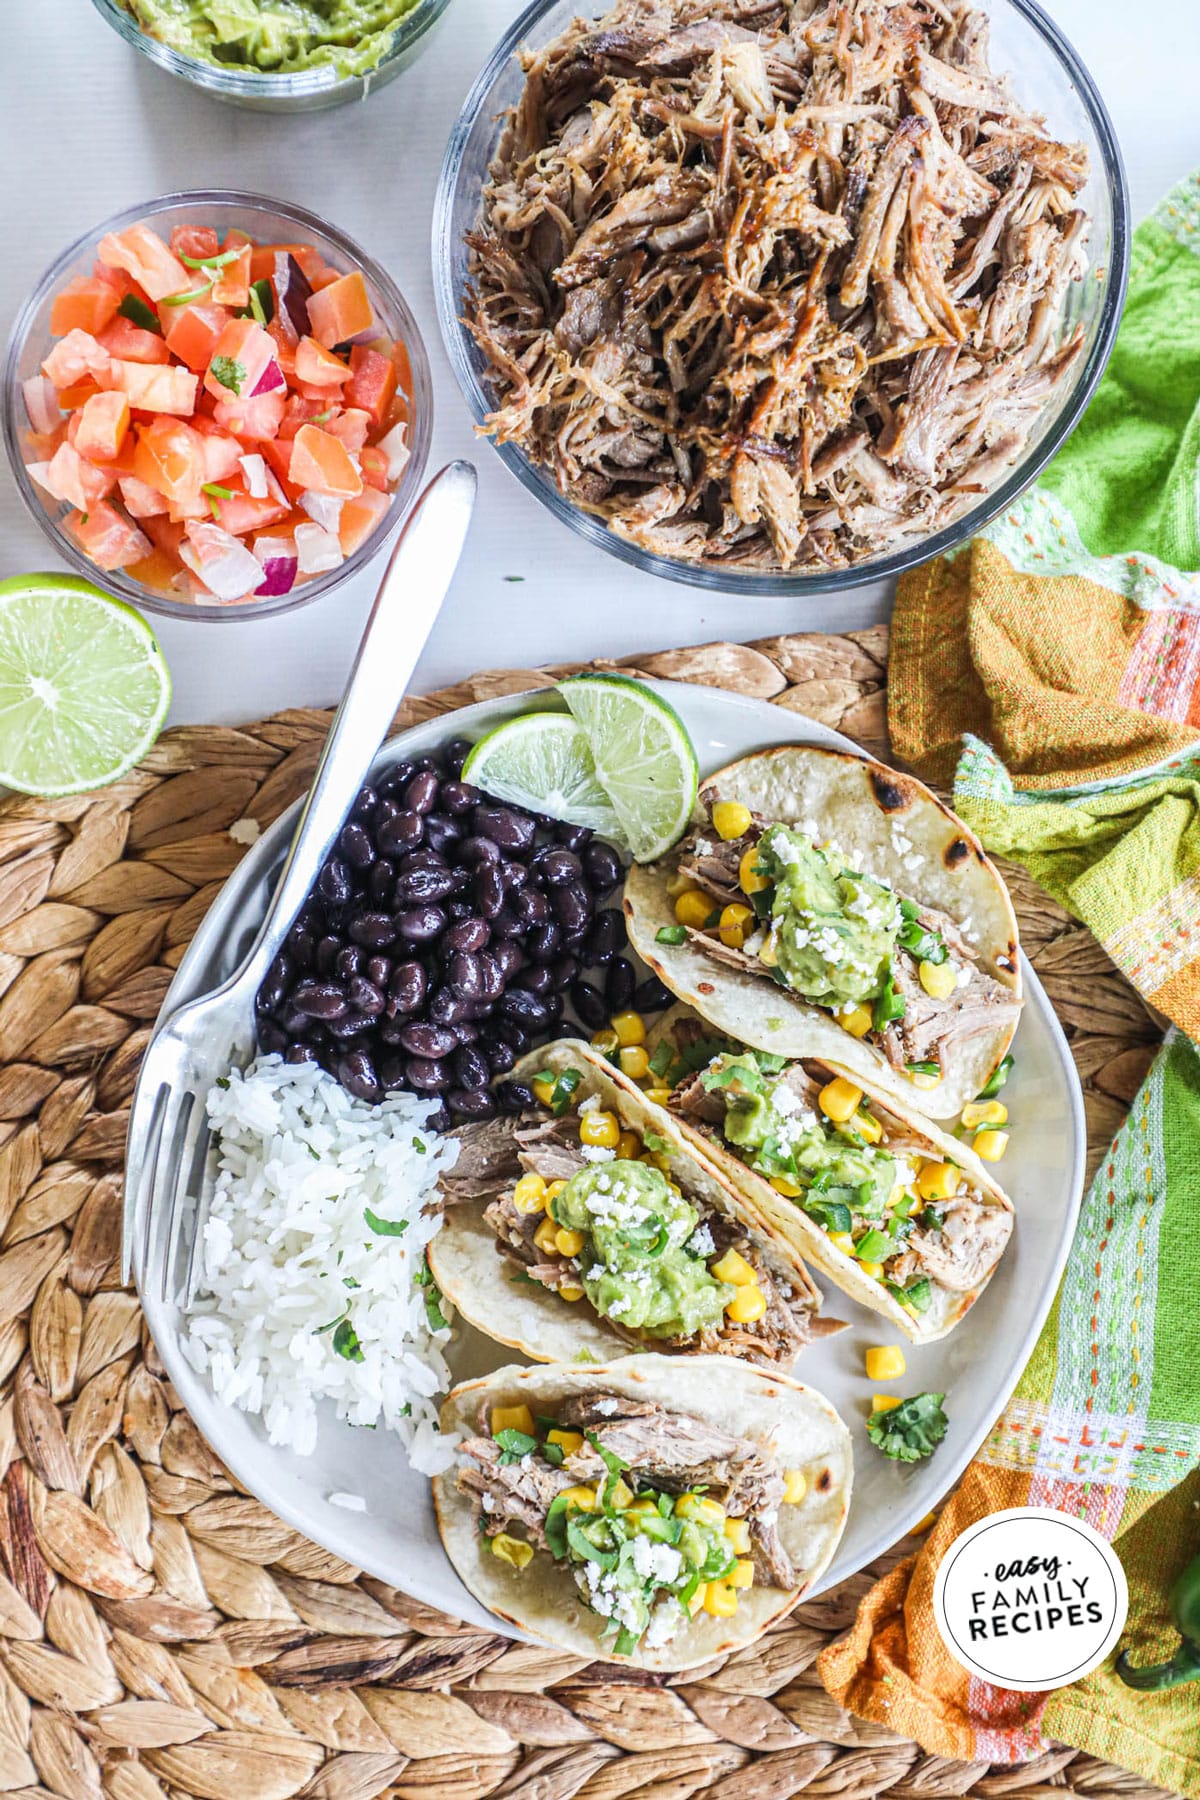 Pork carnitas served on tortillas with rice and beans